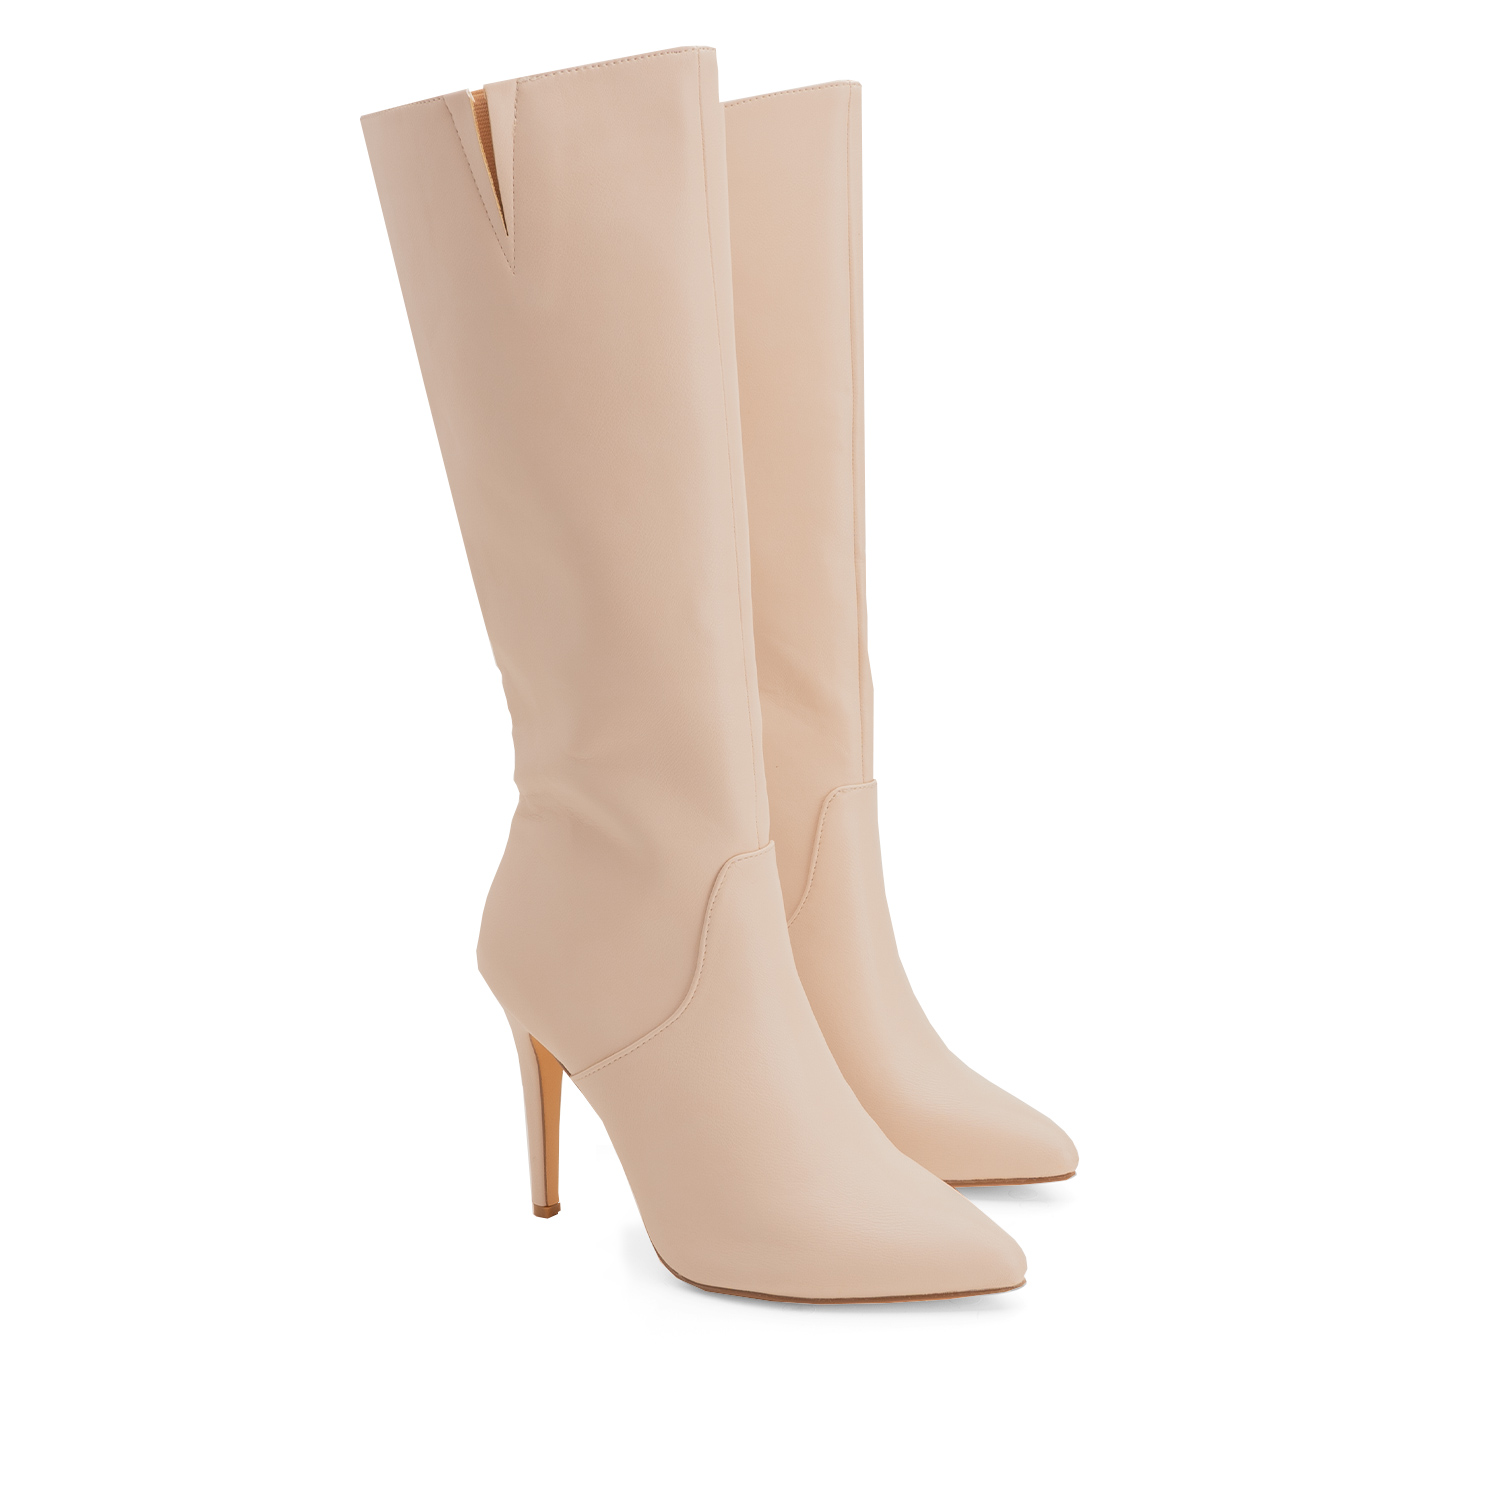 Heeled boots in ivory faux leather 